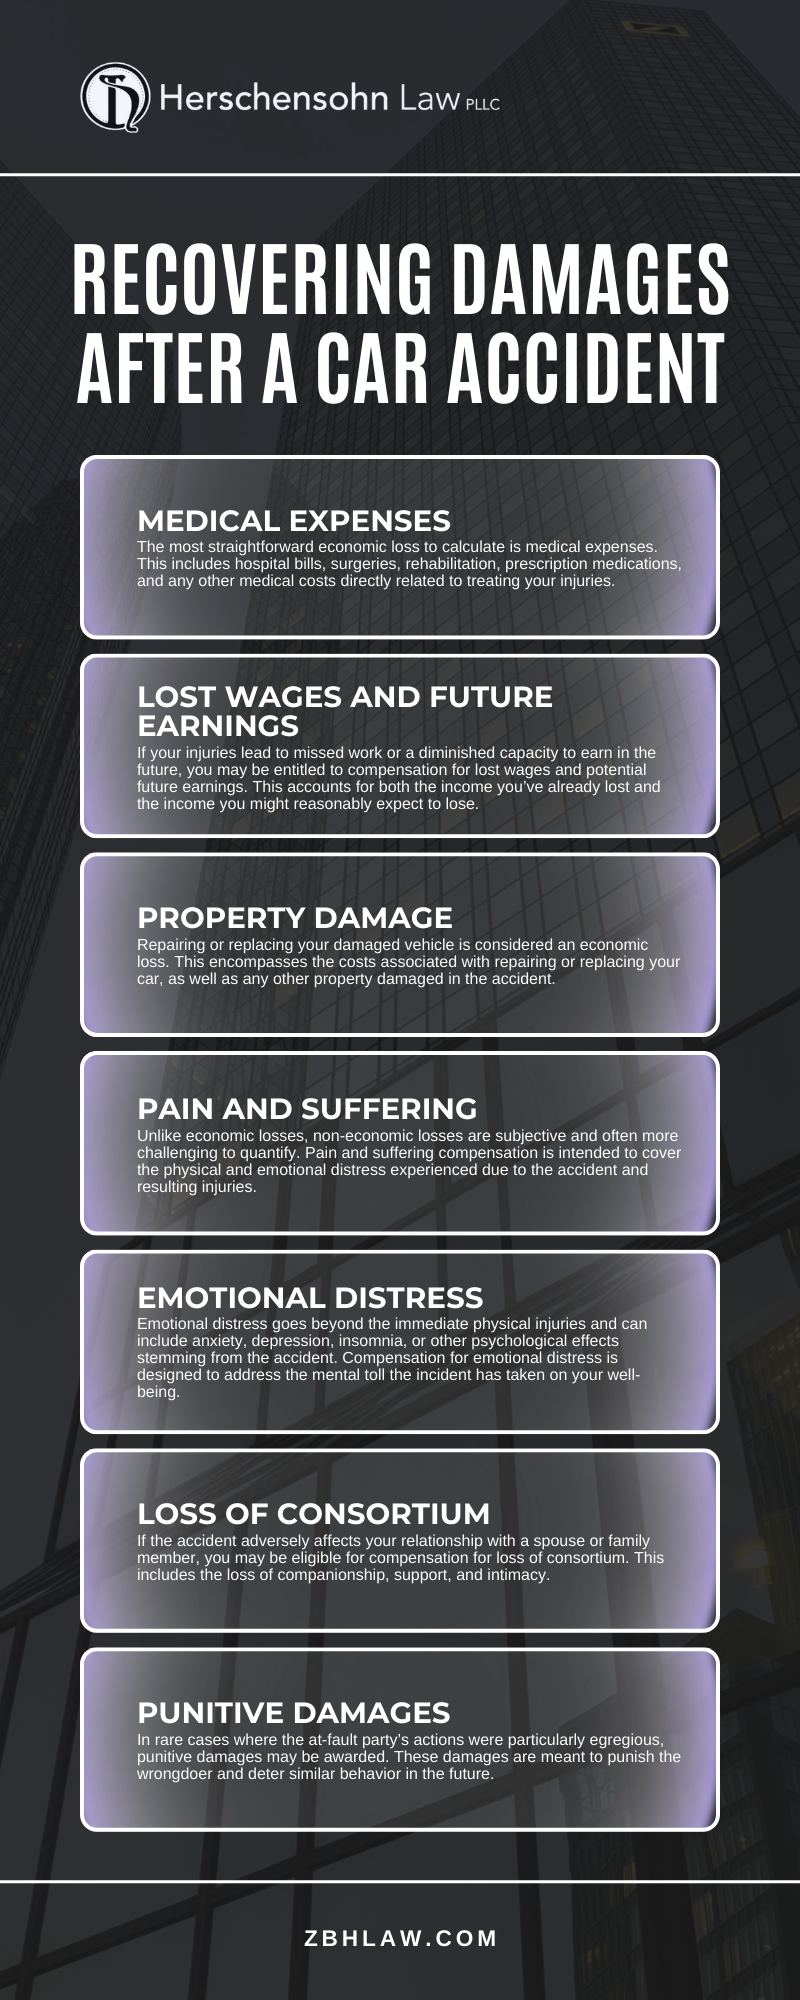 Recovering Damages After A Car Accident Infographic